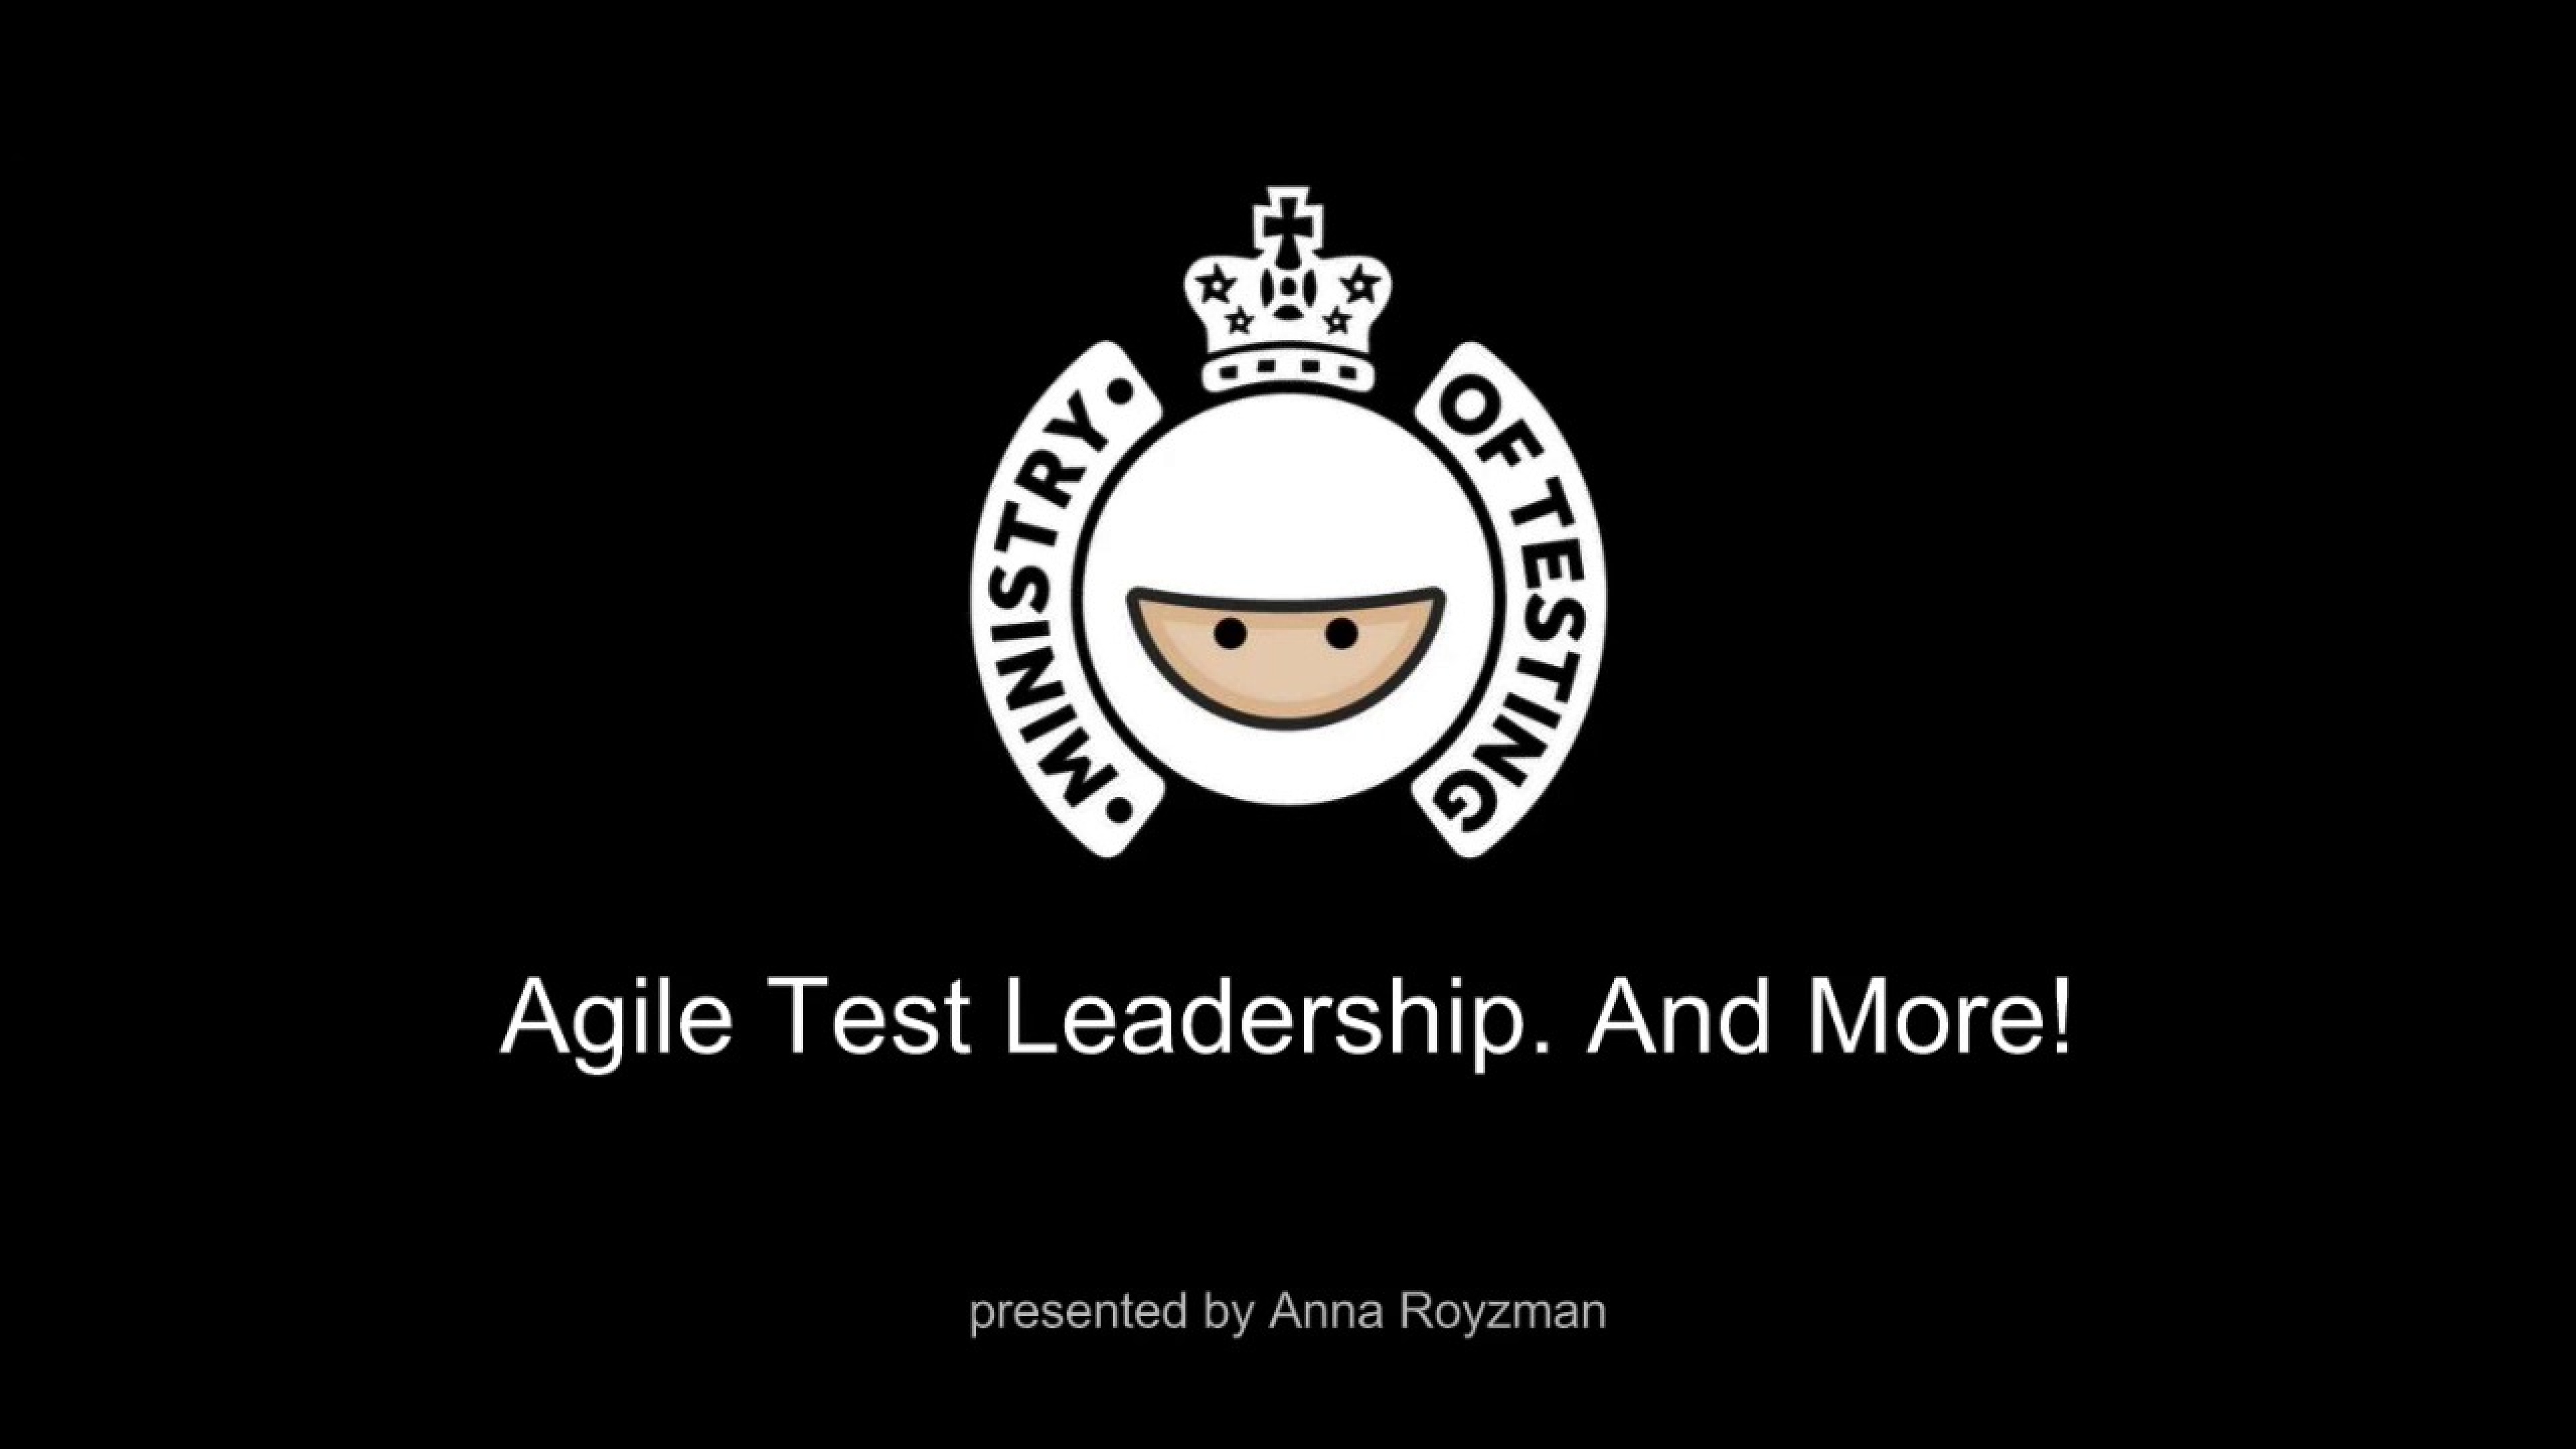 Agile Test Leadership and More! with Anna Royzman